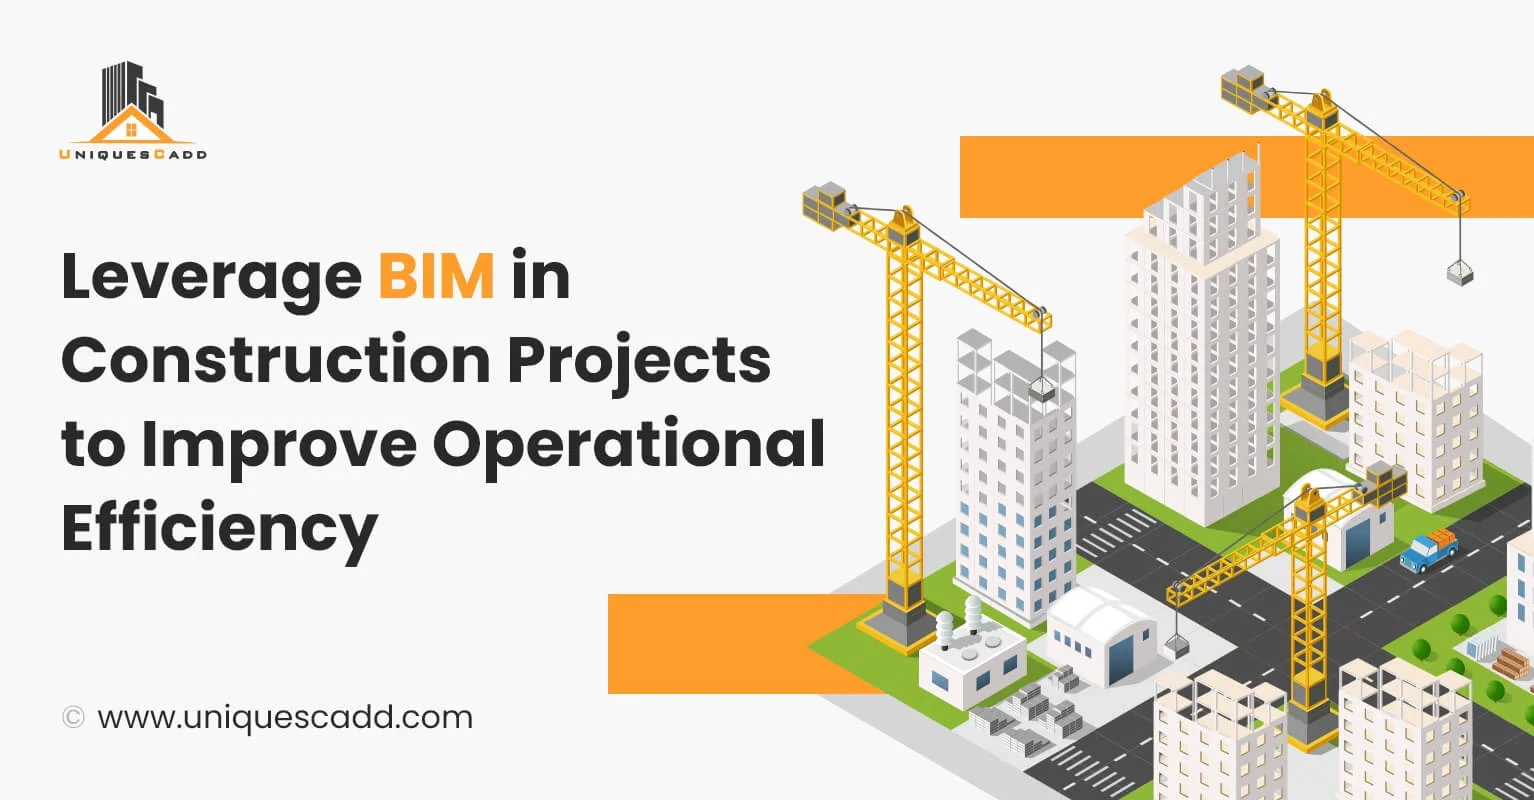 Leverage BIM in Construction Projects to Improve Operational Efficiency